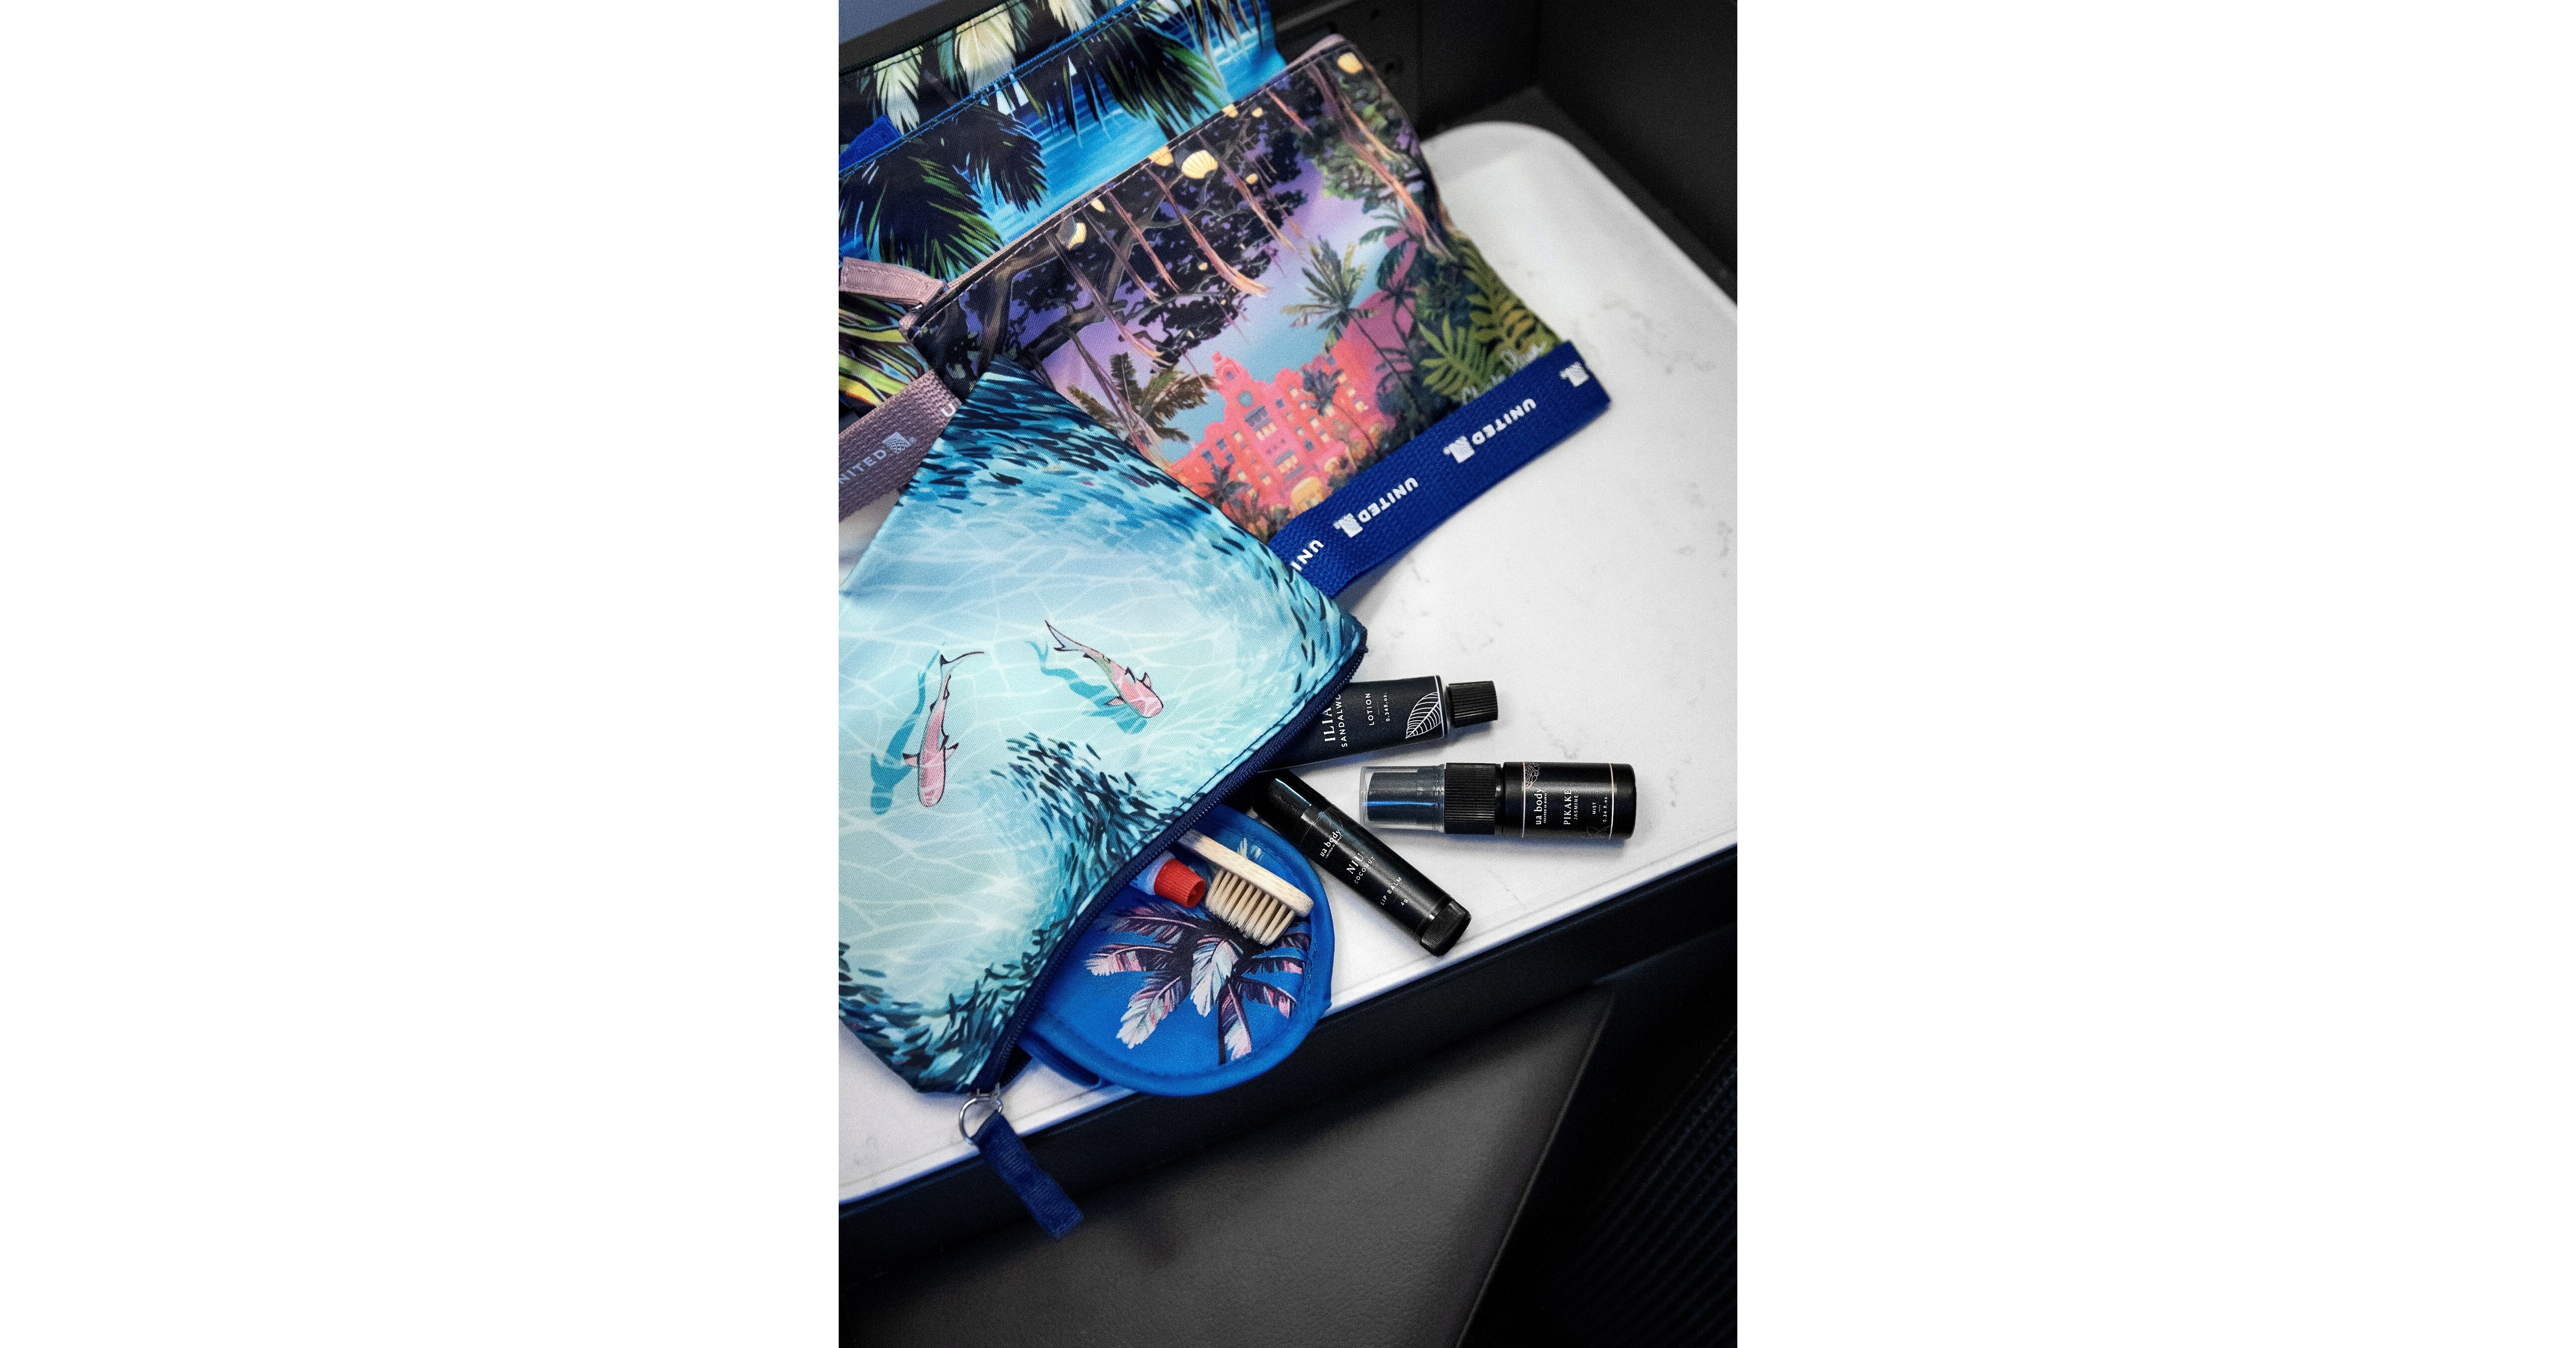 United’s New Transcontinental Amenity Kit Features Skincare Products from Venus Williams-Backed Brand